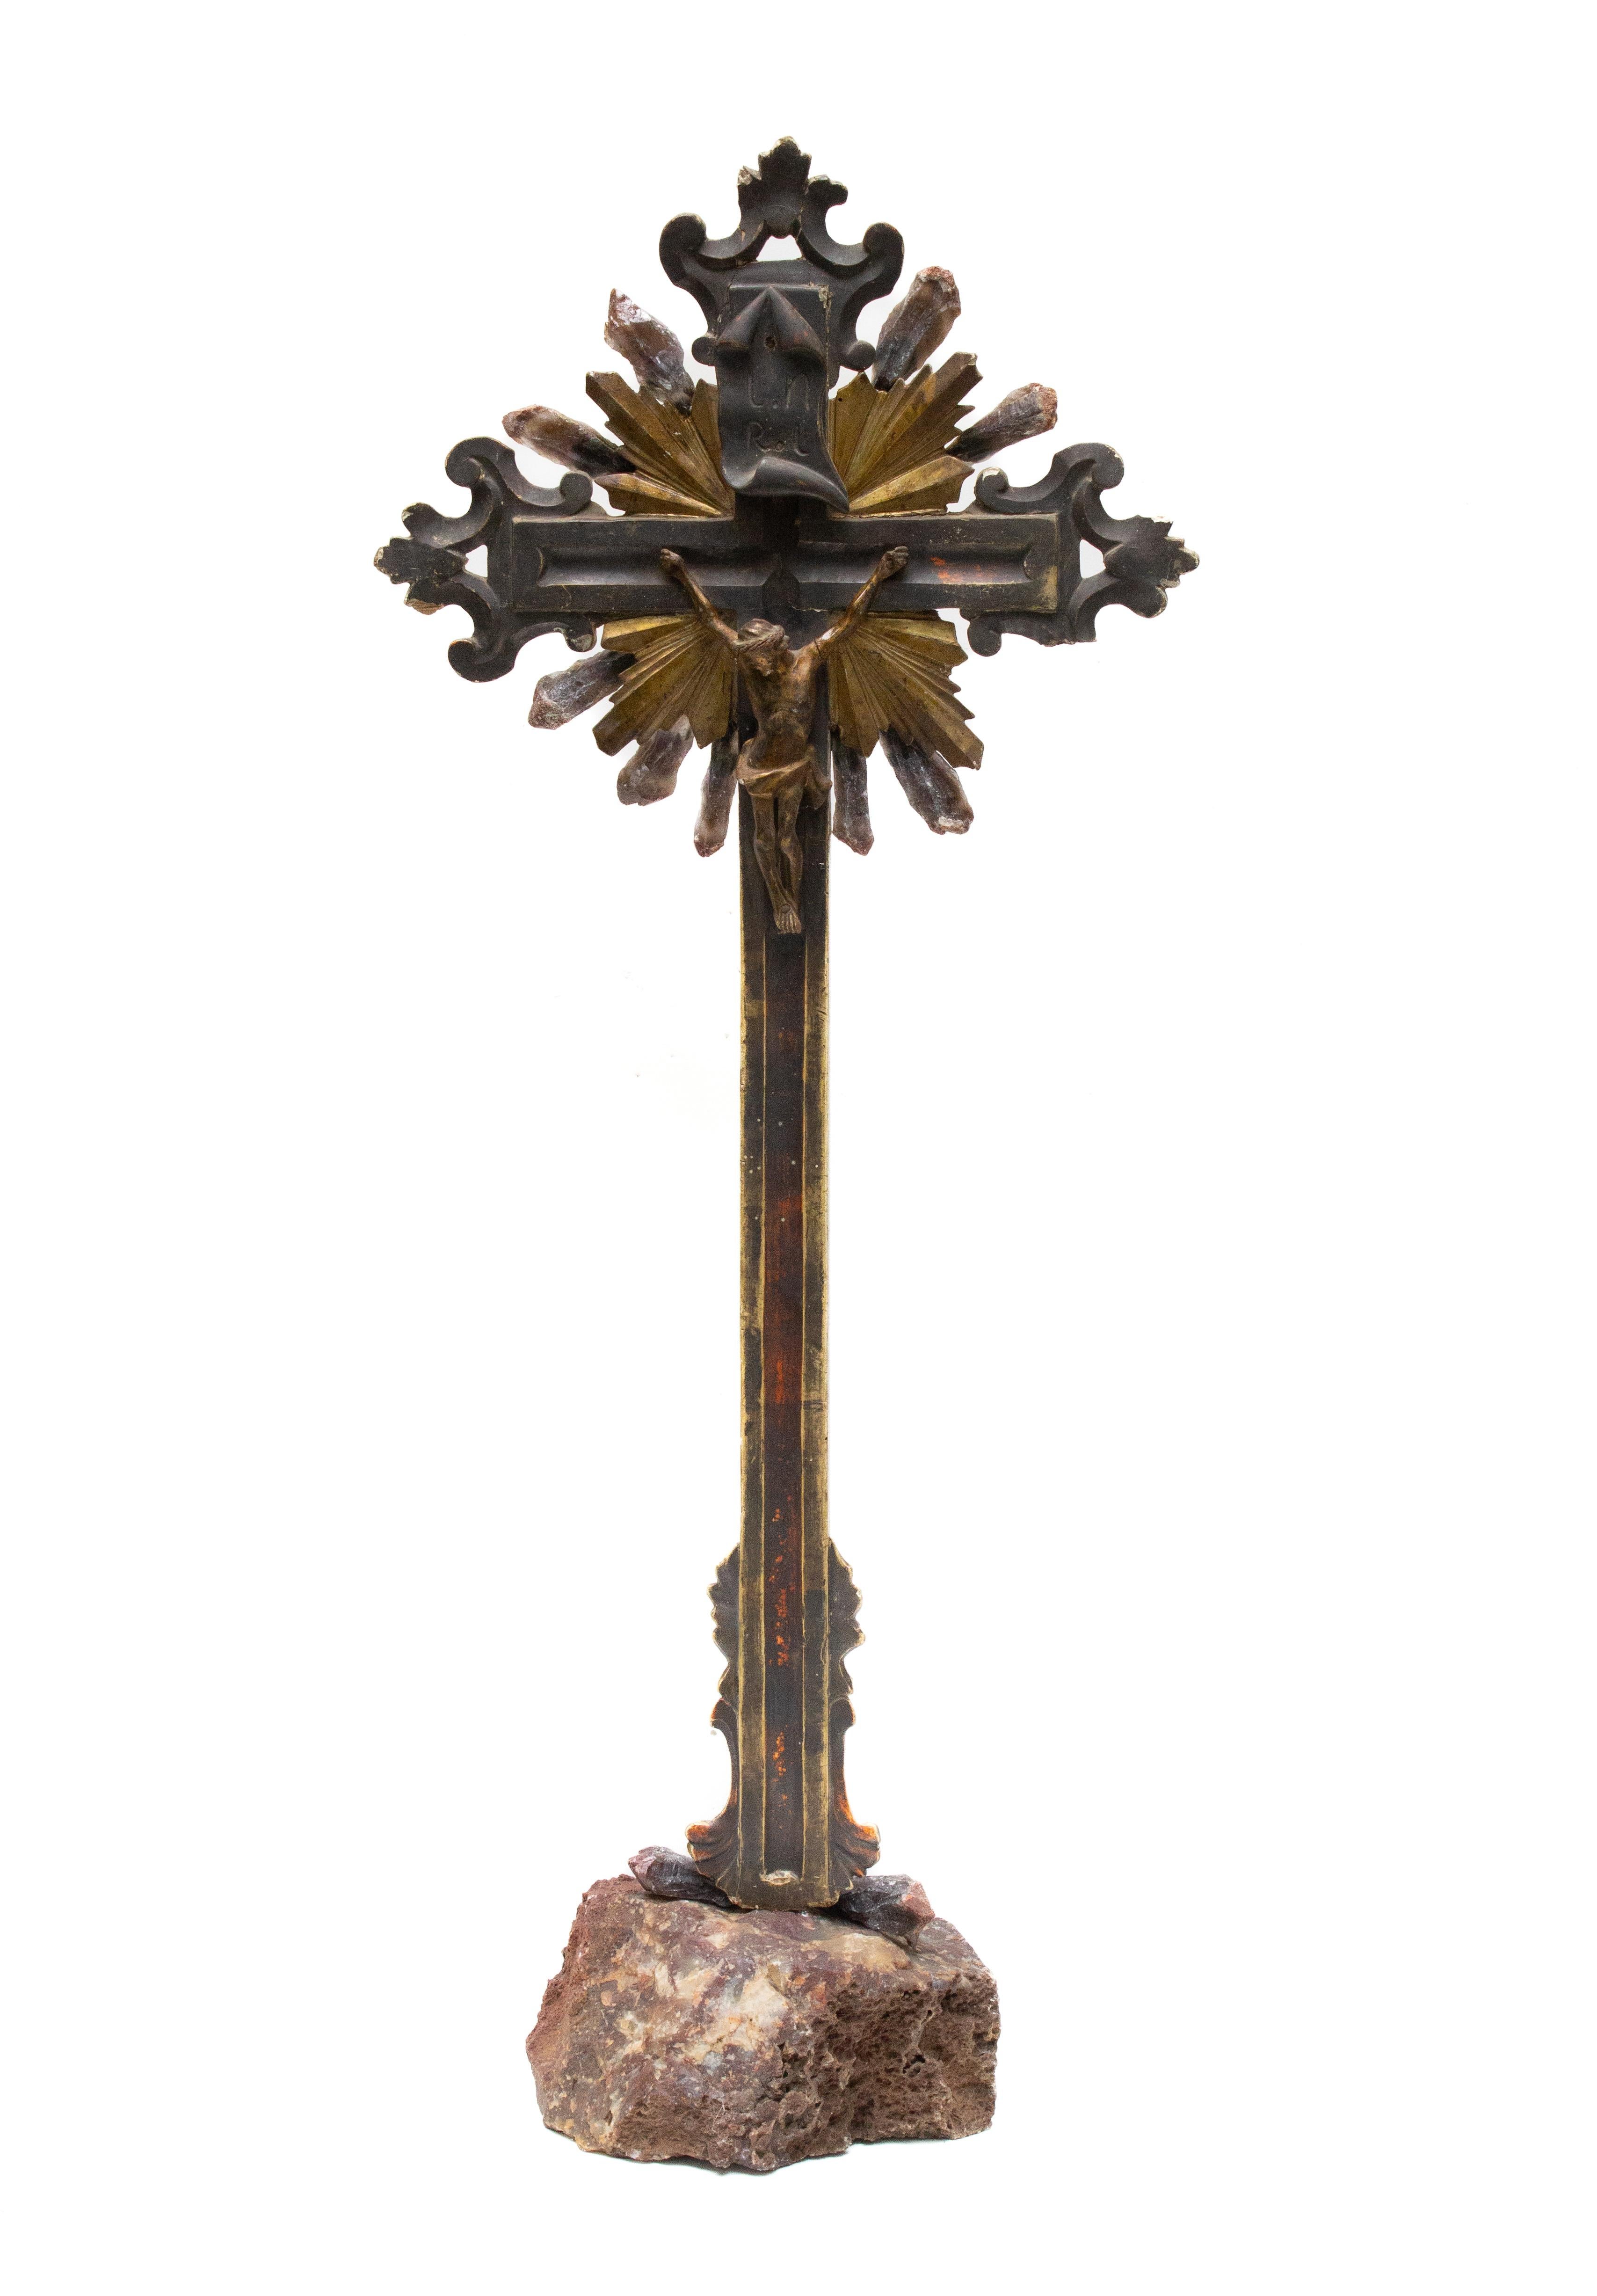 Sculptural 18th century Italian crucifix mounted on jasper with crystal points. The crystal points create more sunrays around the halo of the crucifix. The reddish tips of the crystals coordinate with the red bole of the crucifix. It is mounted on